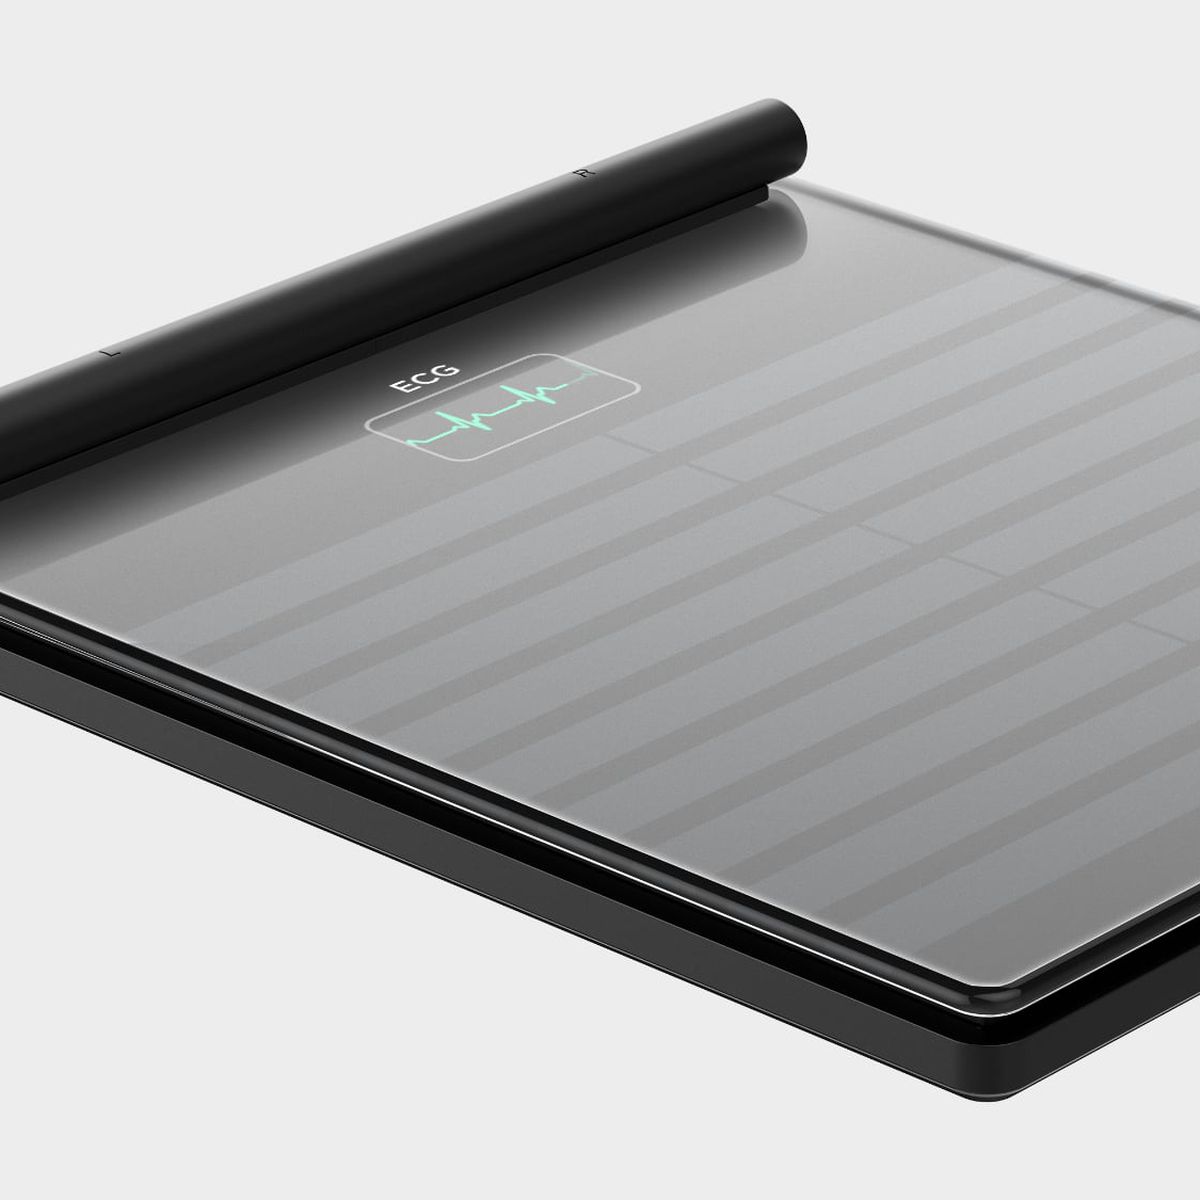 Withings Body+ Body Composition Smart Scale REVIEW - MacSources